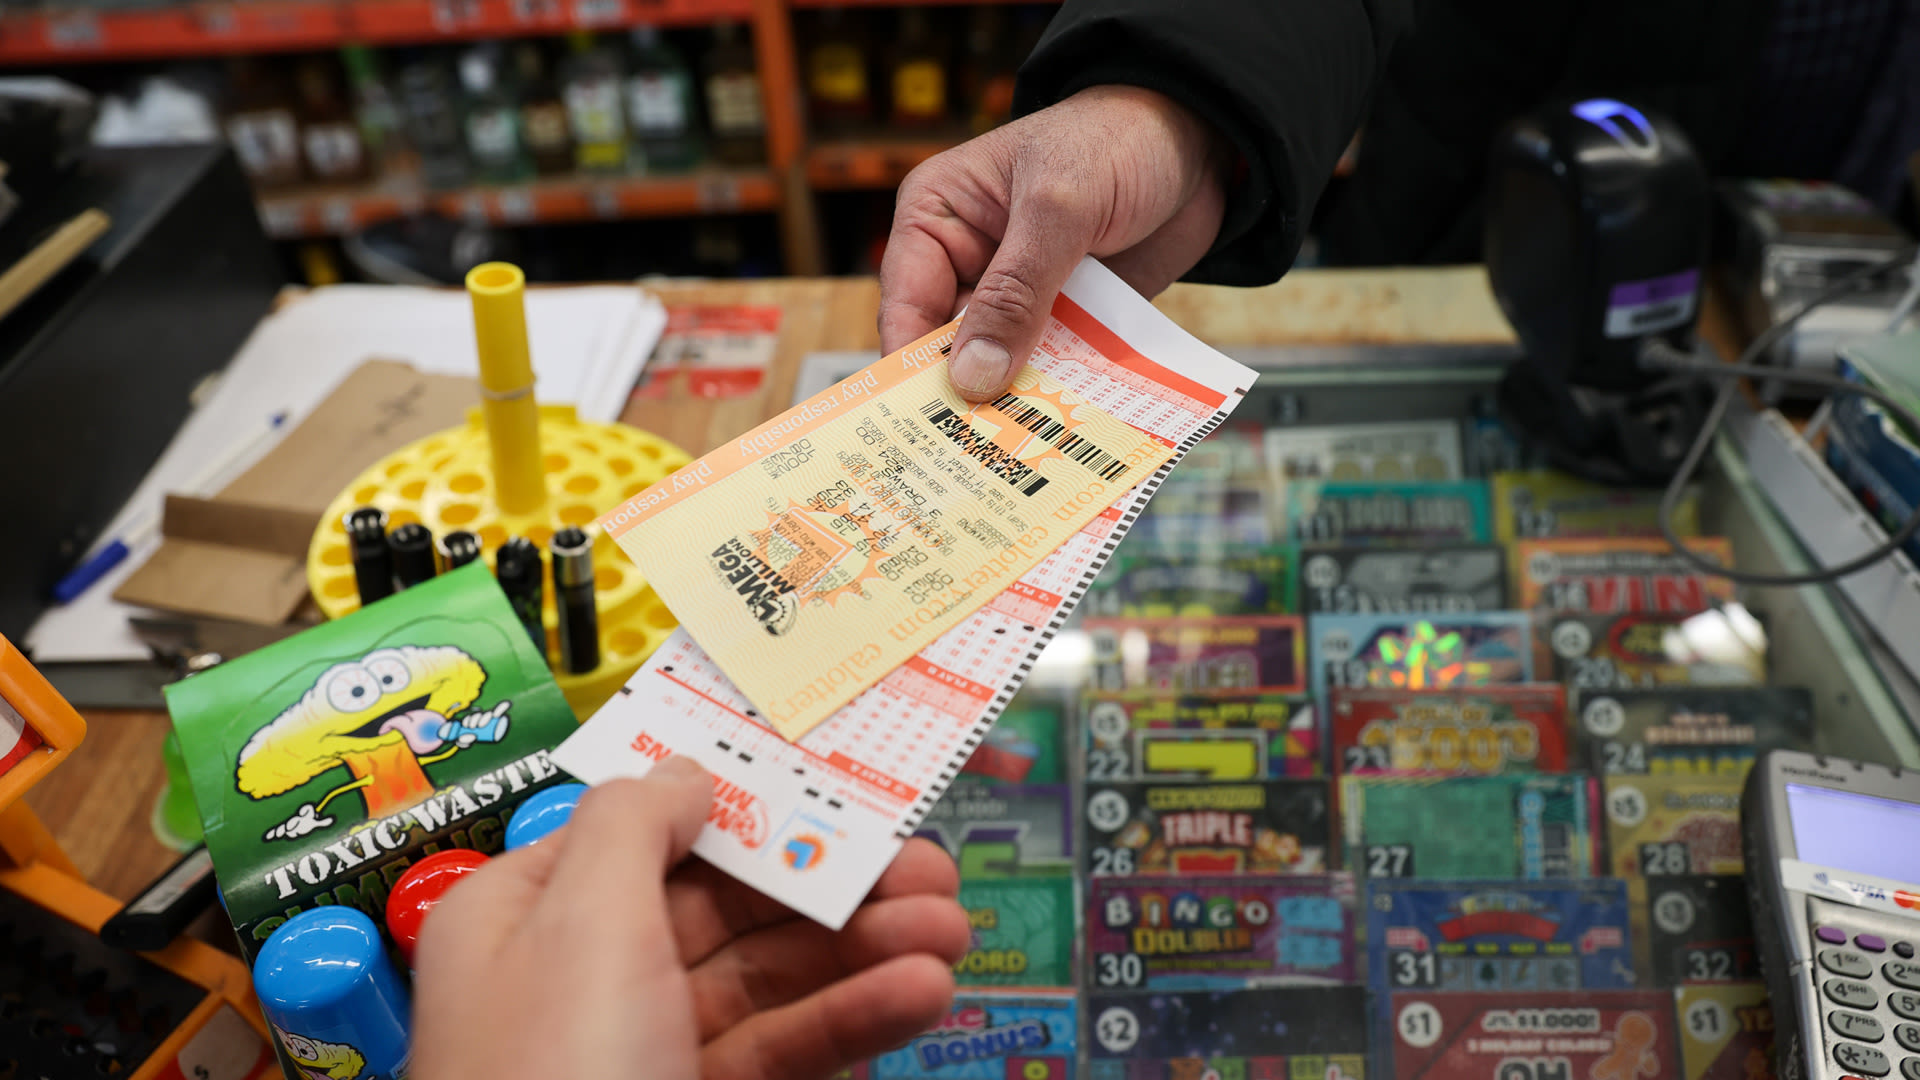 Lottery players urged to check tickets as $200,000 prize set to expire in days